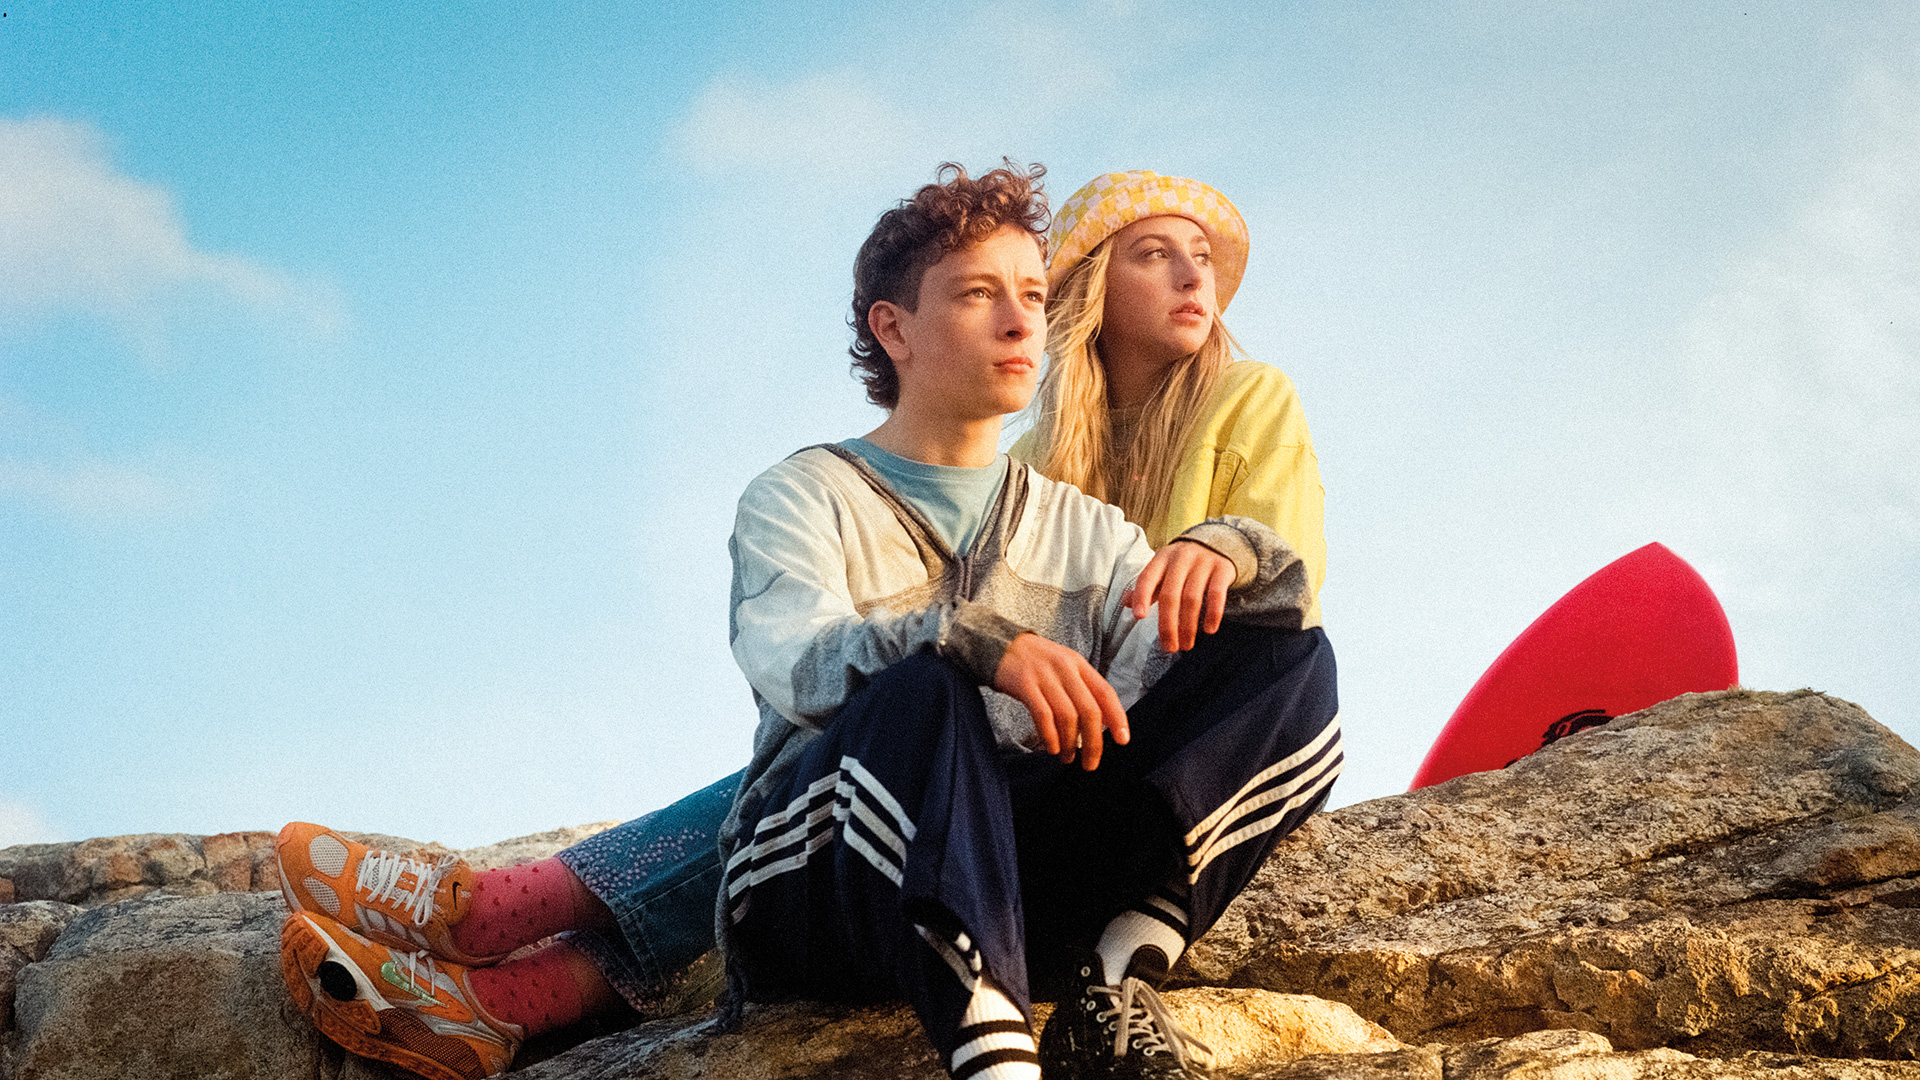 A boy and a girl sit on a rock beside a surfboard